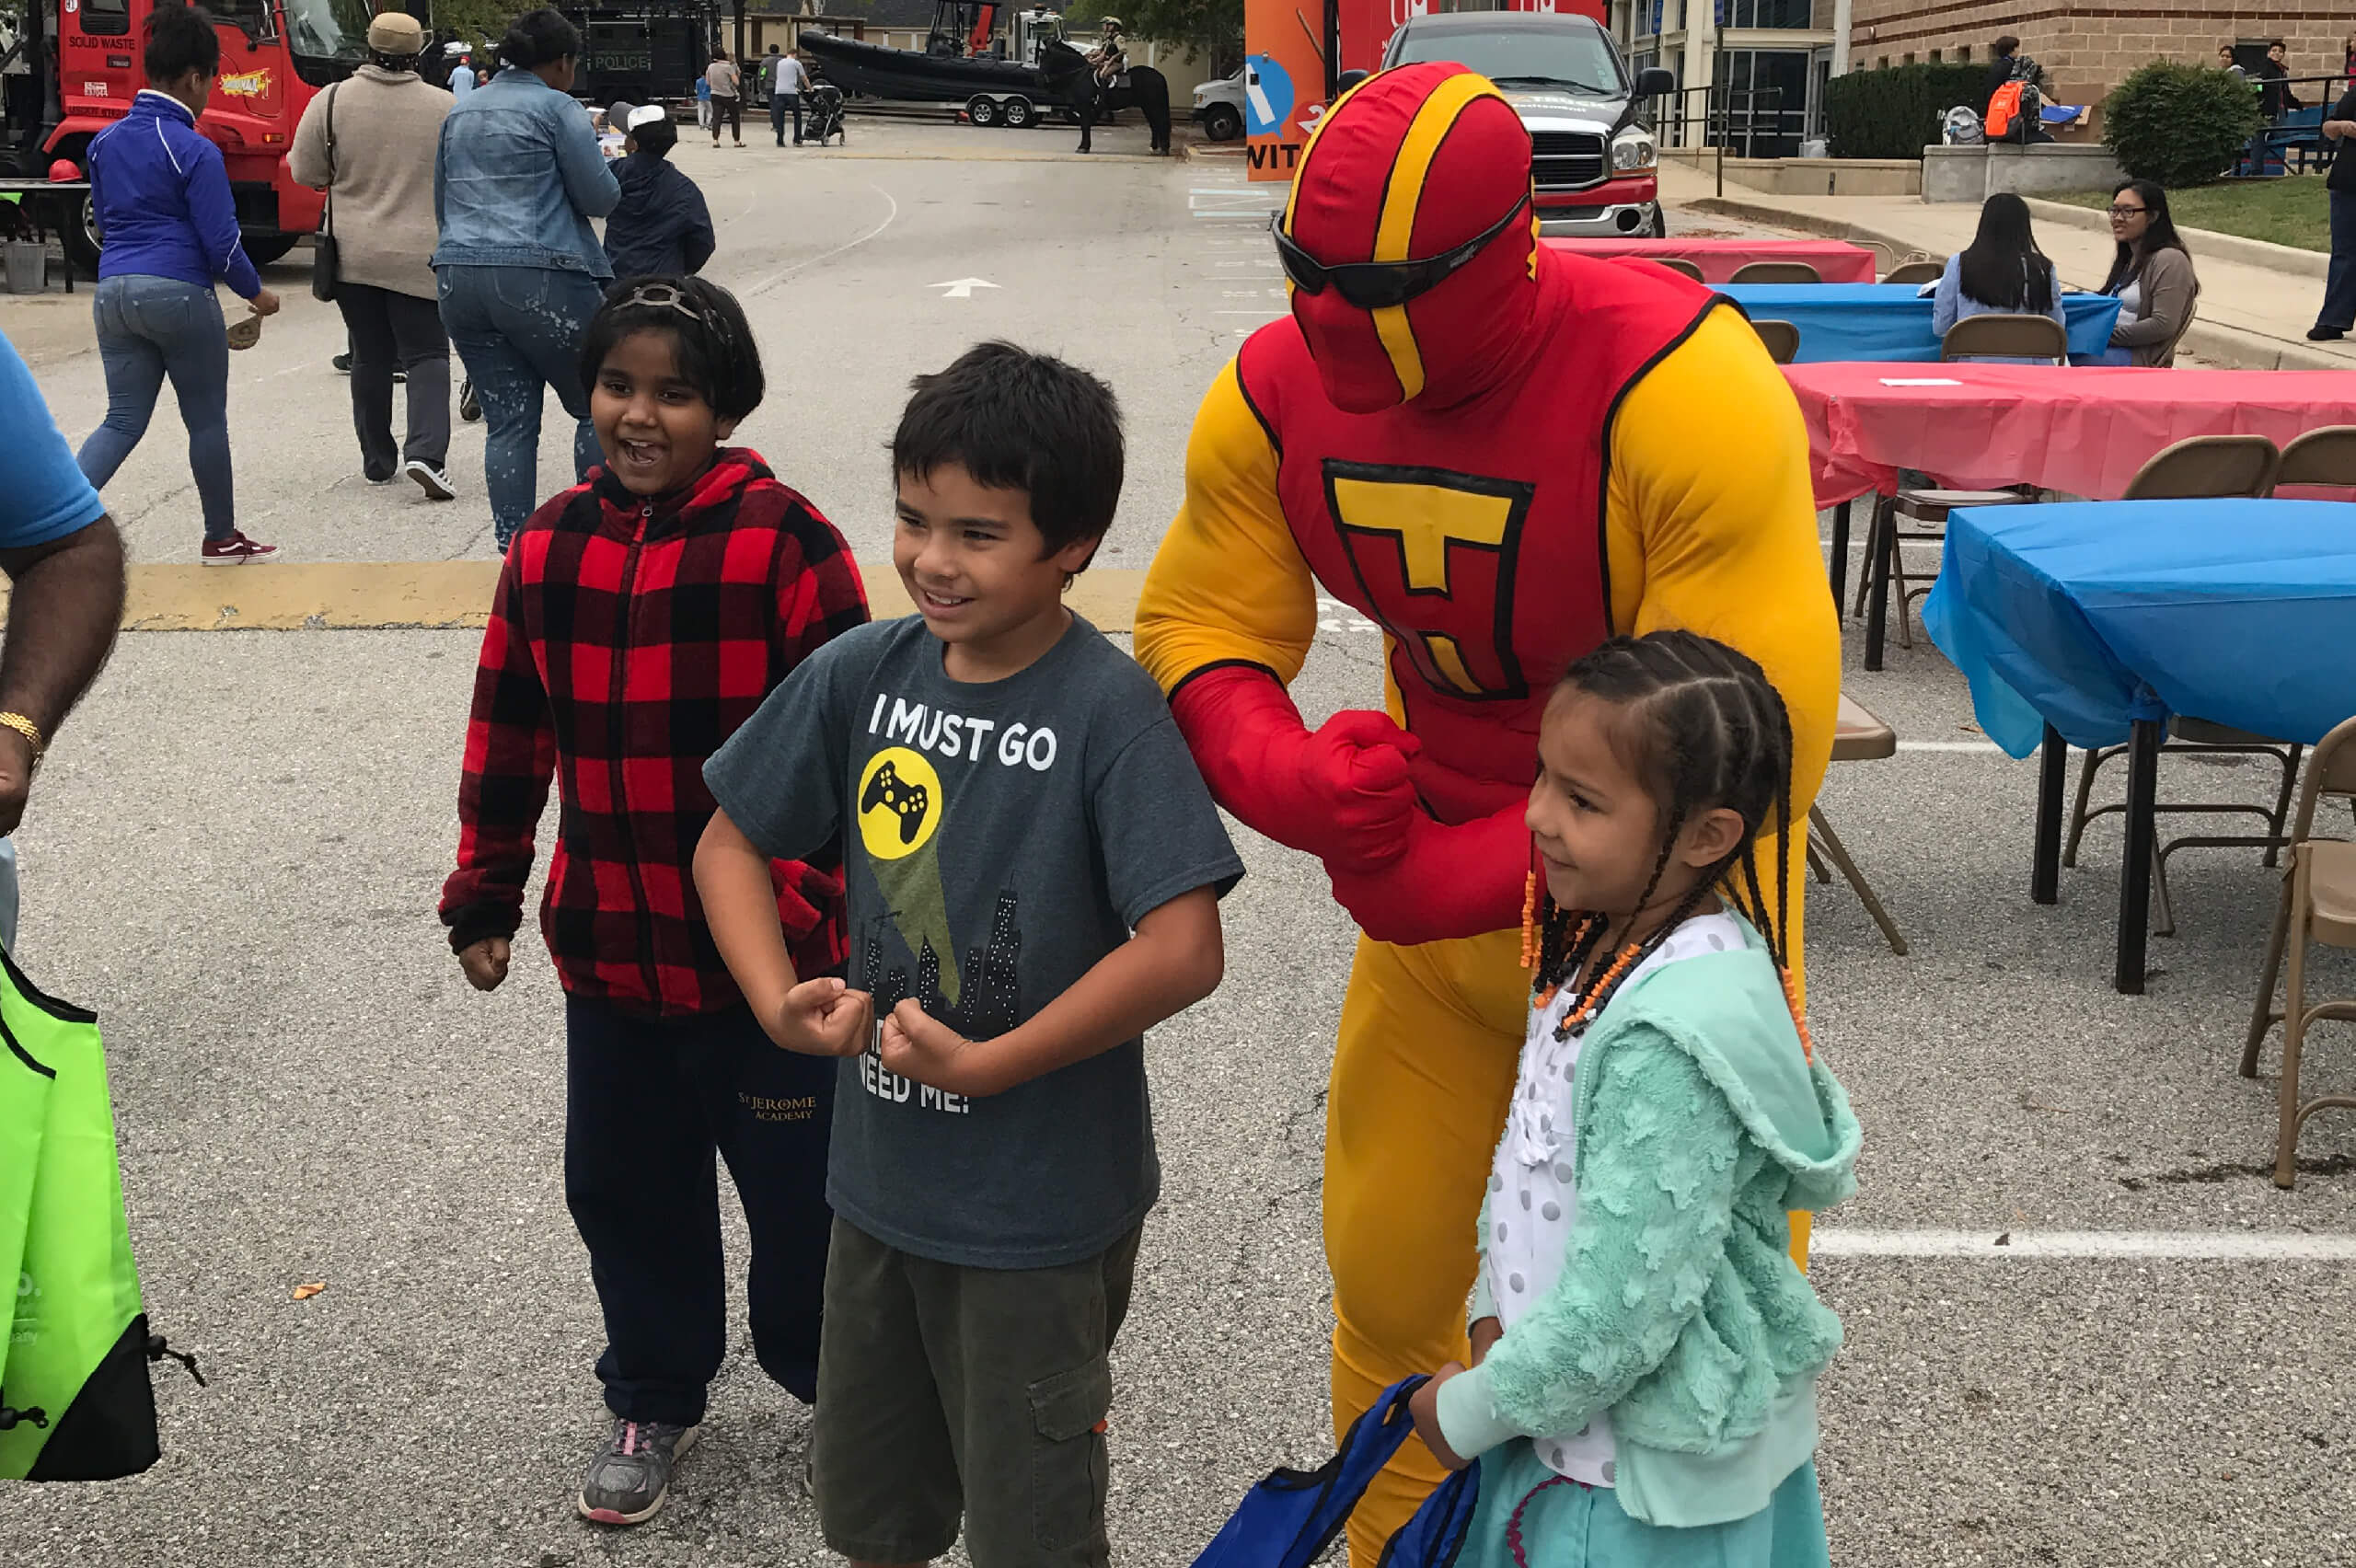 TurboMan flexes his muscles with kids in Upper Marlboro, MD